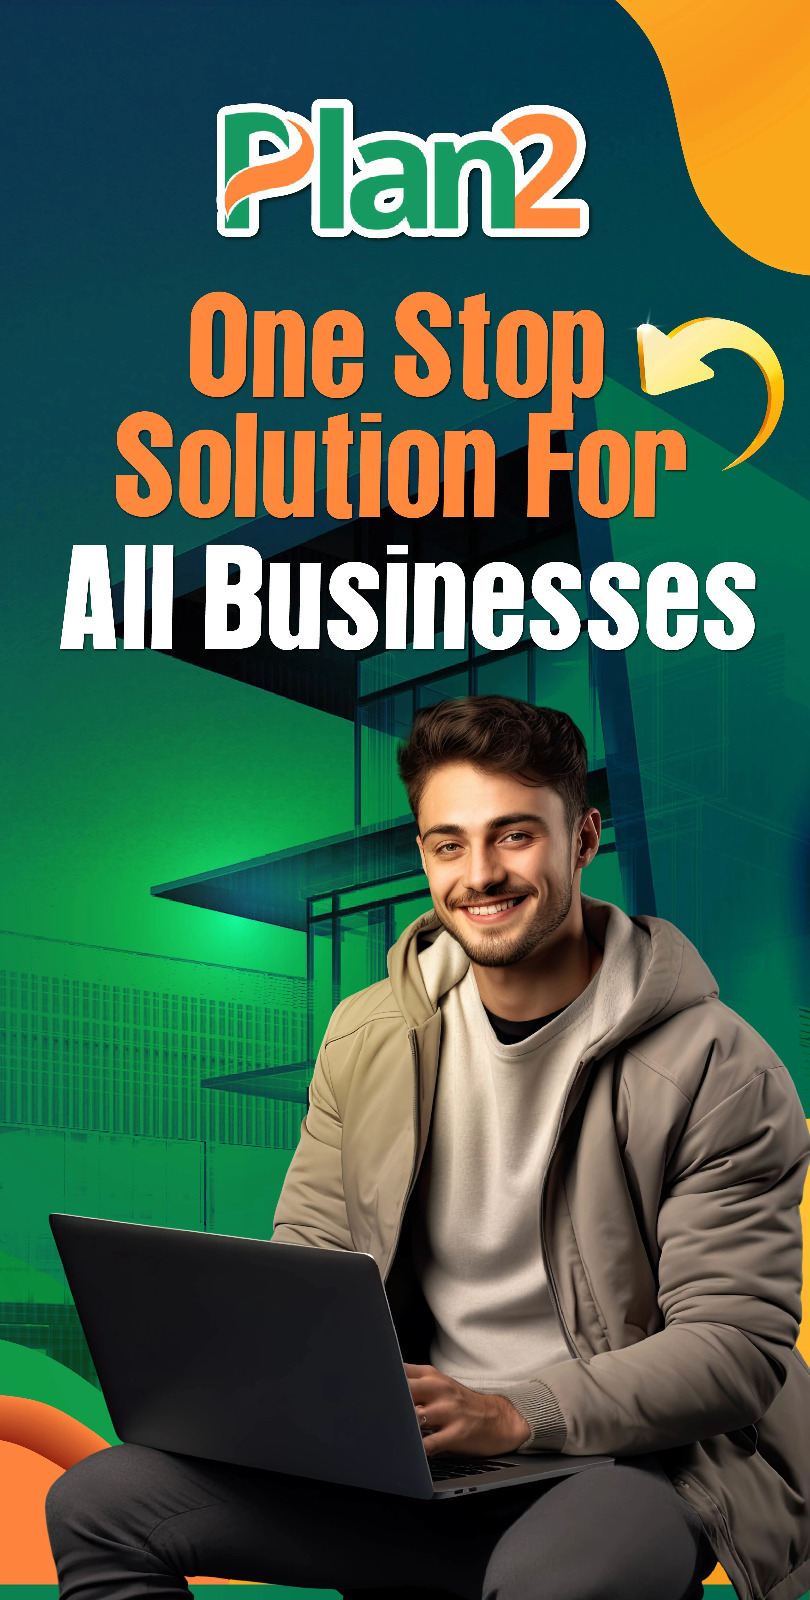 One stop solution for all businesses